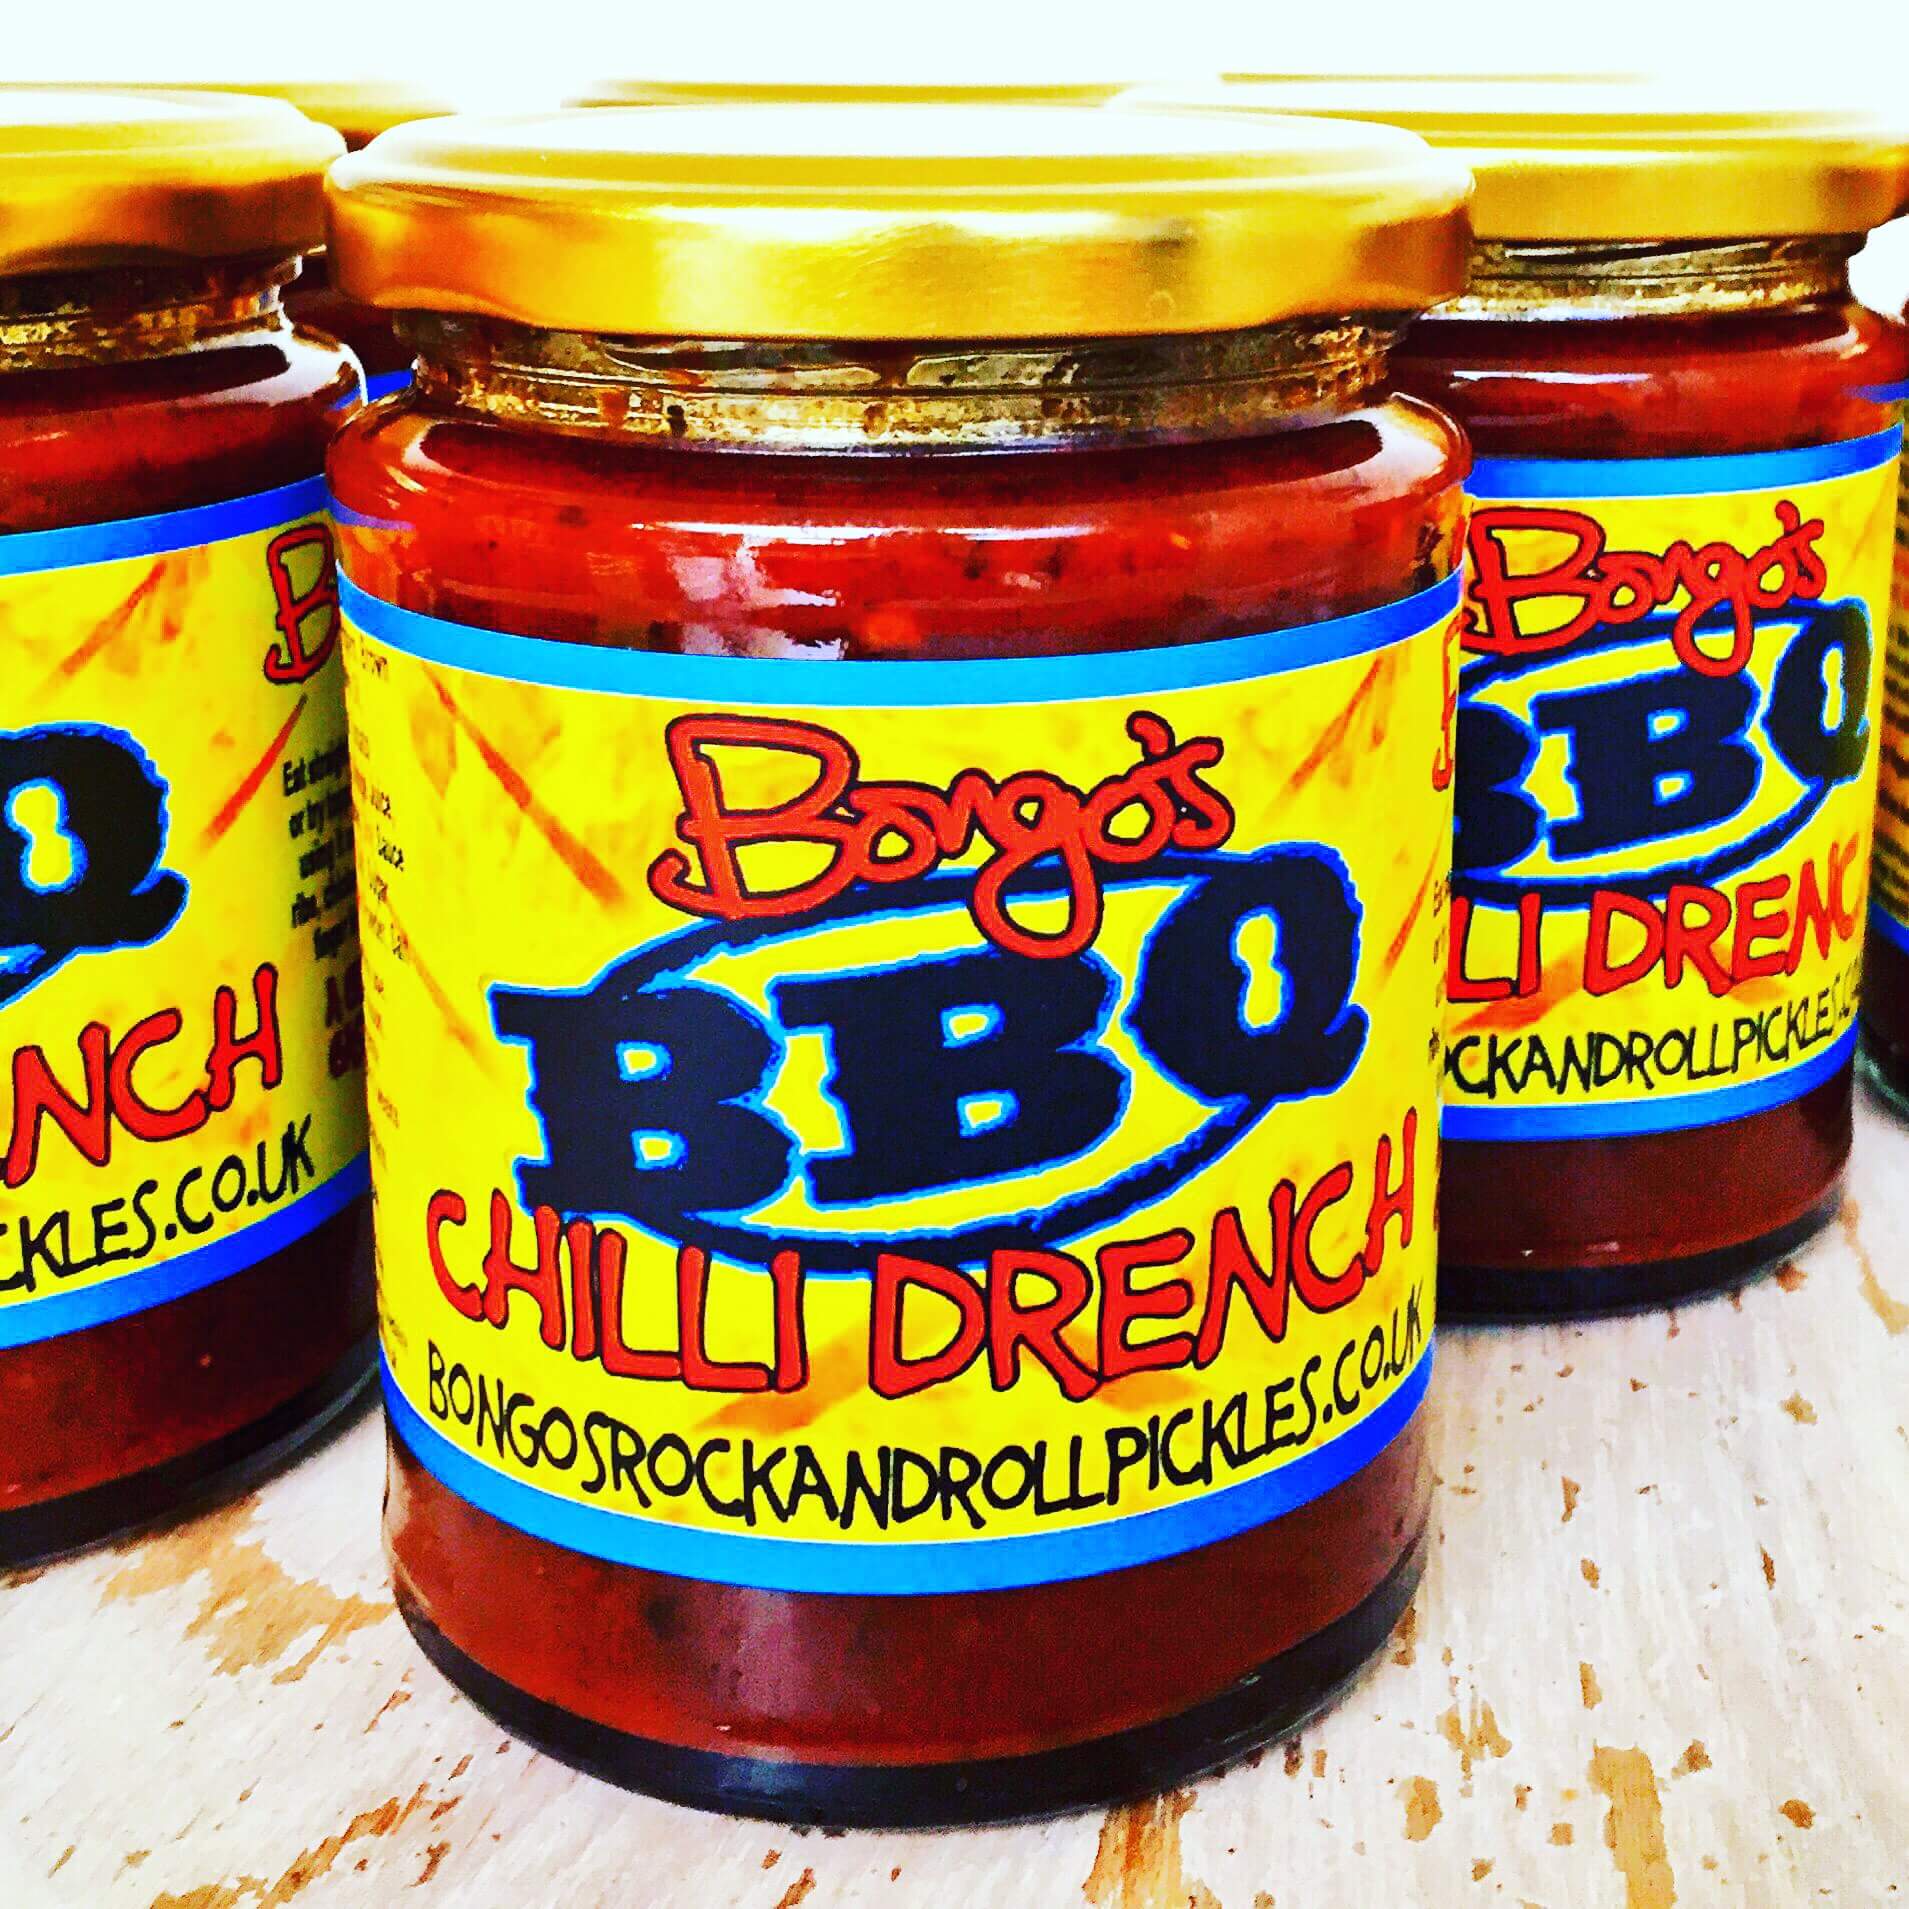 Image of Bongo's BBQ Chilli Drench by Bongo's Rock and Roll Pickles, designed, produced or made in the UK. Buying this product supports a UK business, jobs and the local community.